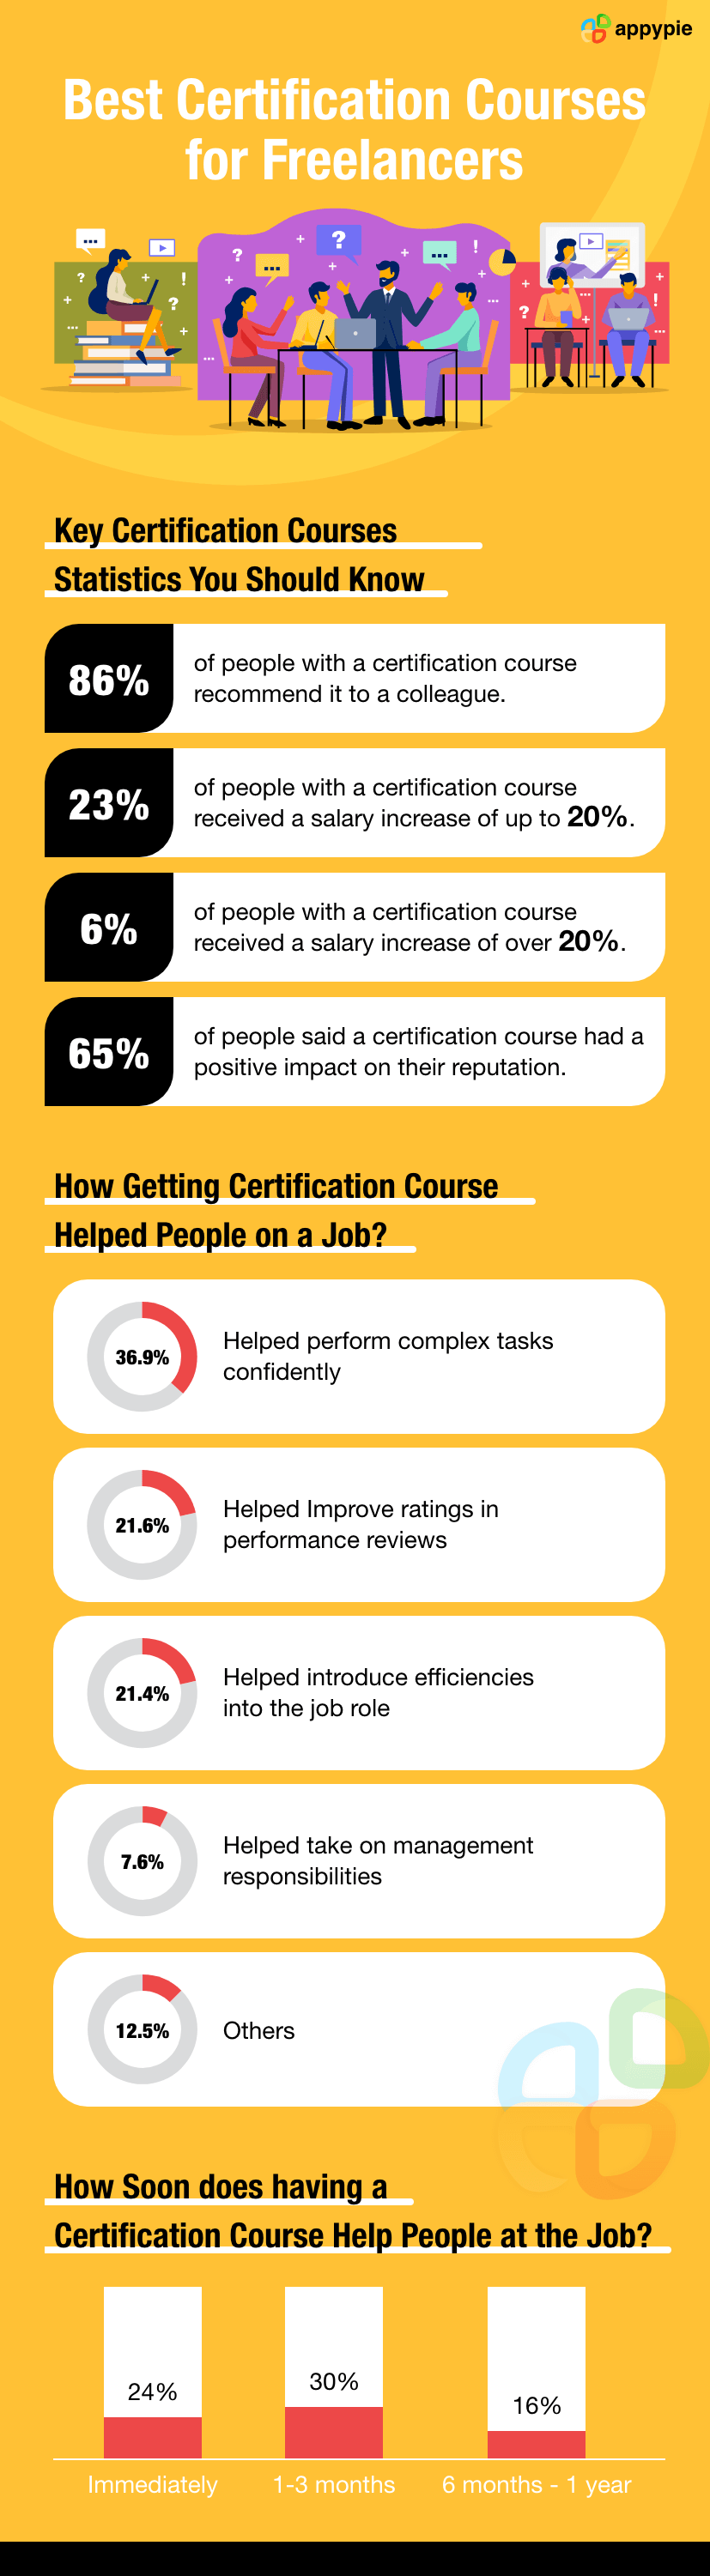 Best Certification Courses for Freelancers - Appy Pie